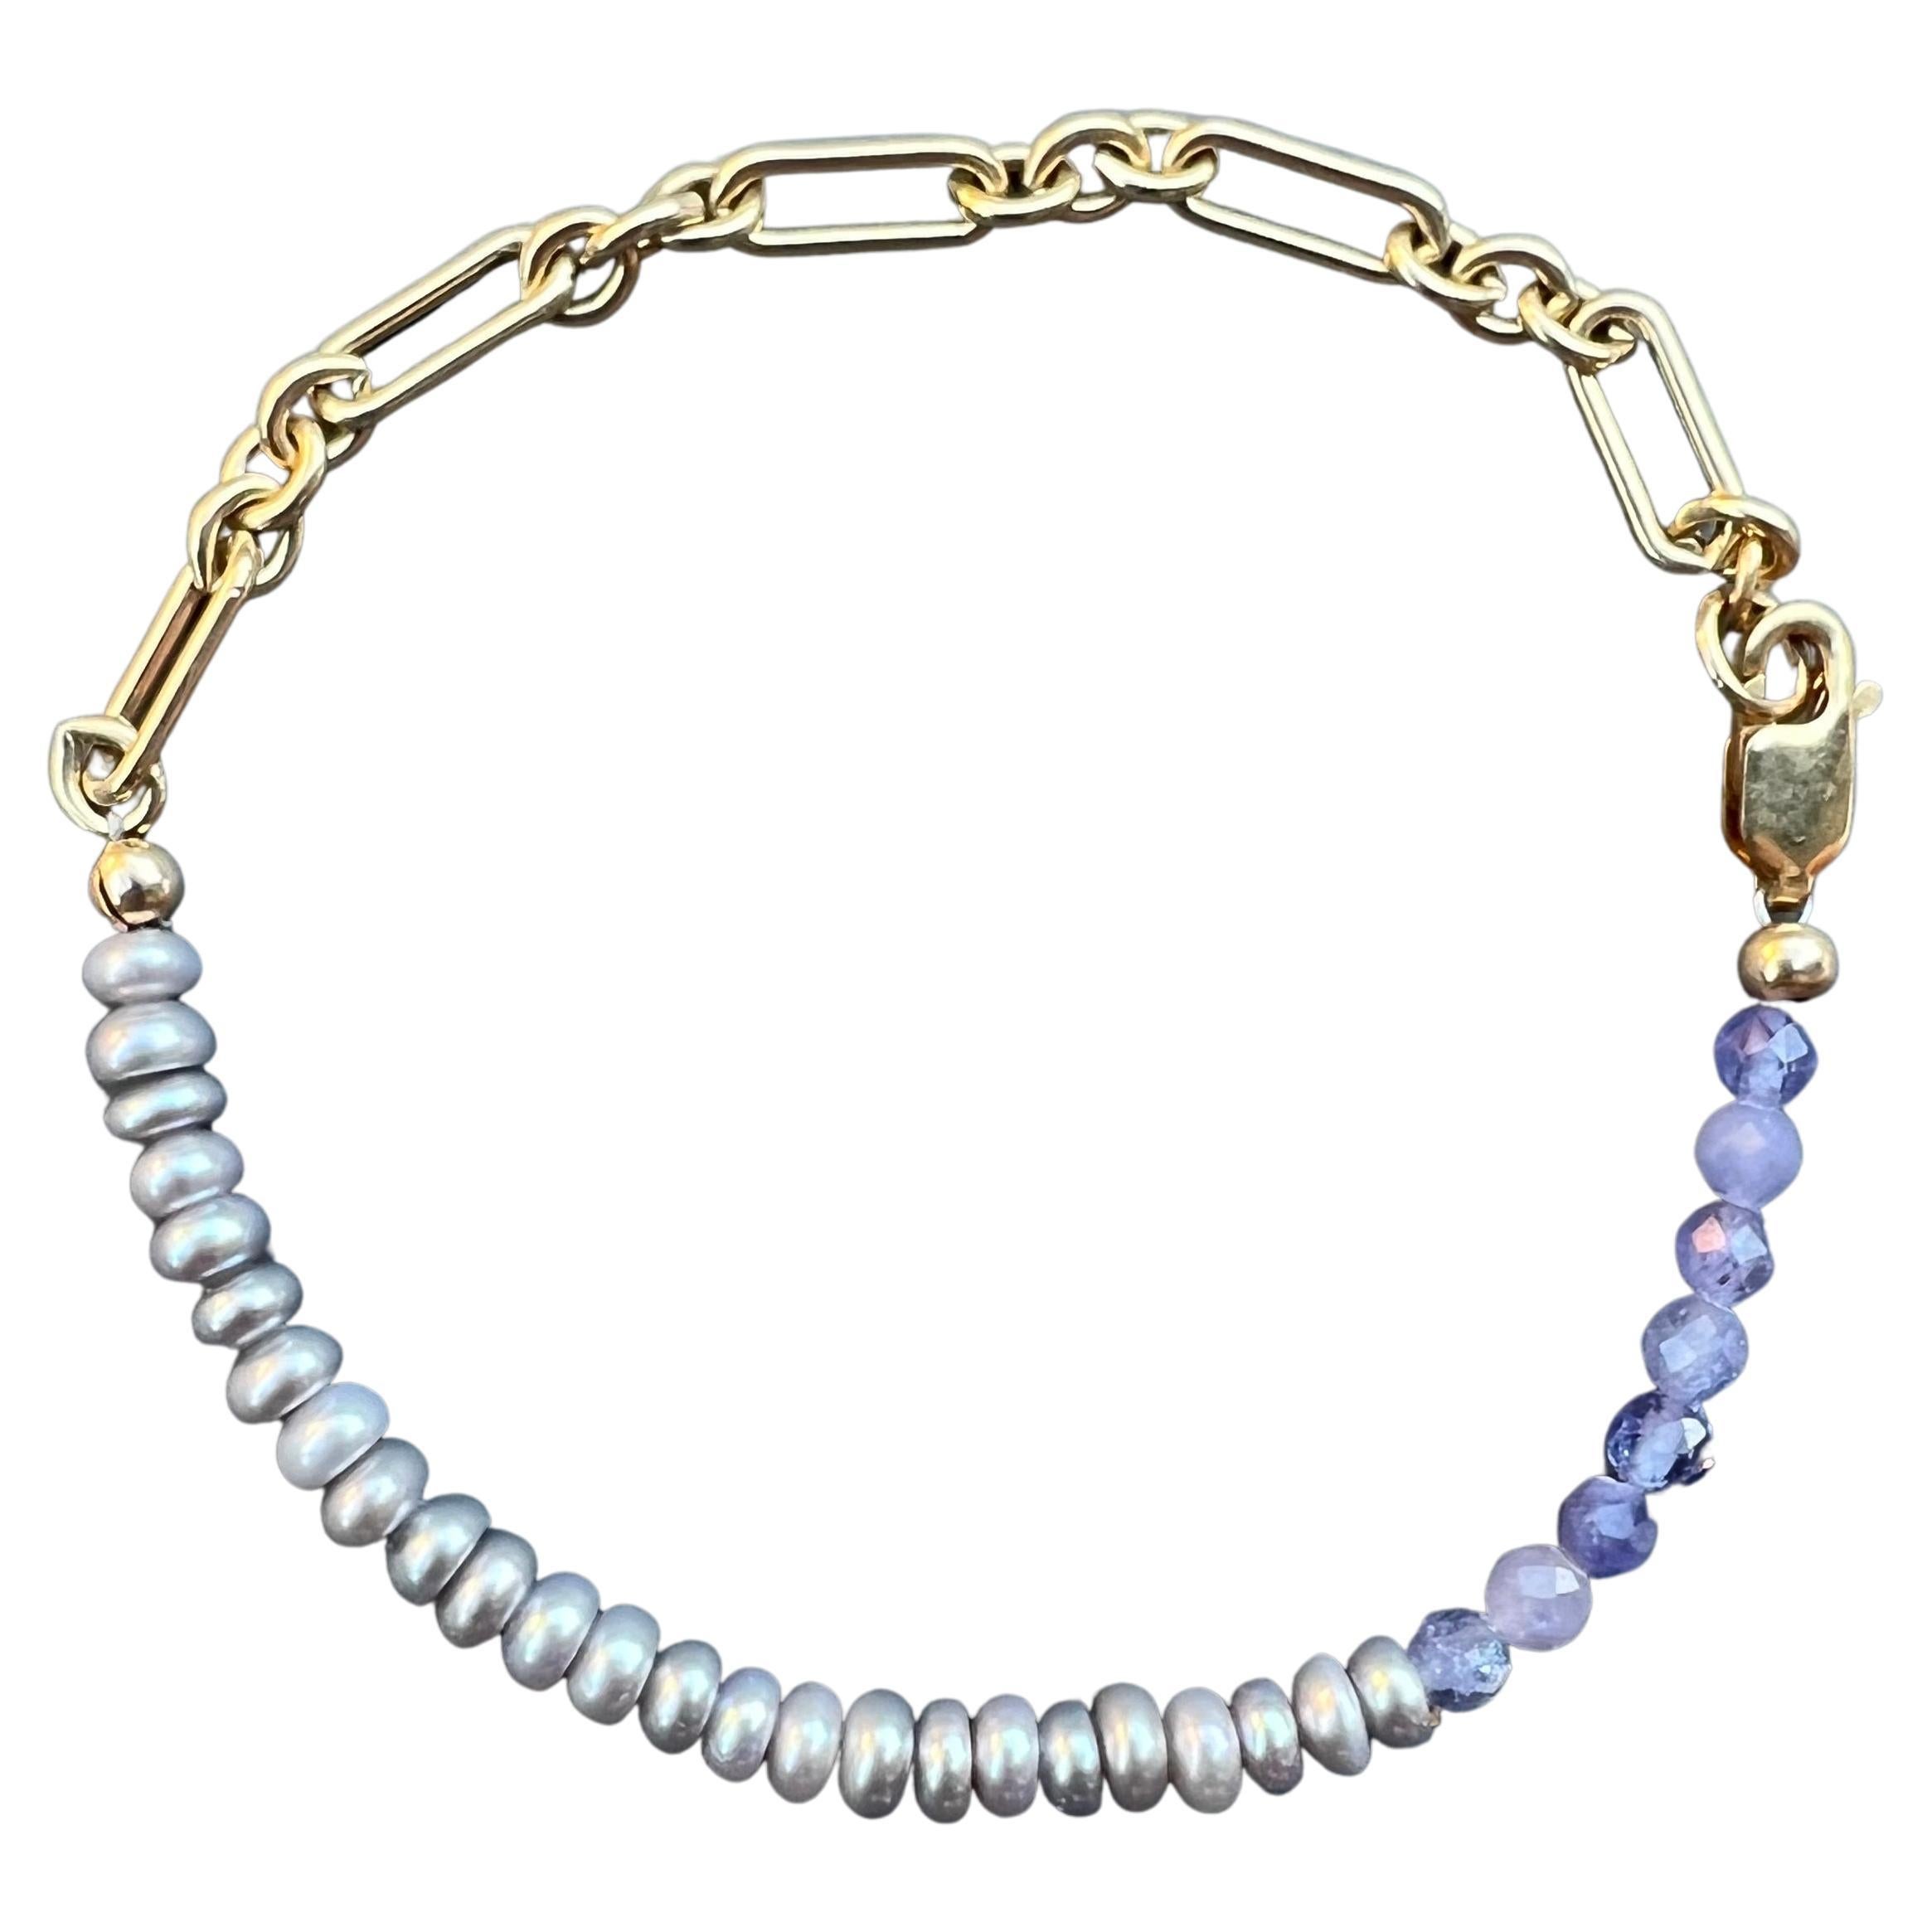 Pearl Tanzanite Bead Bracelet Gold Filled Chain J Dauphin For Sale